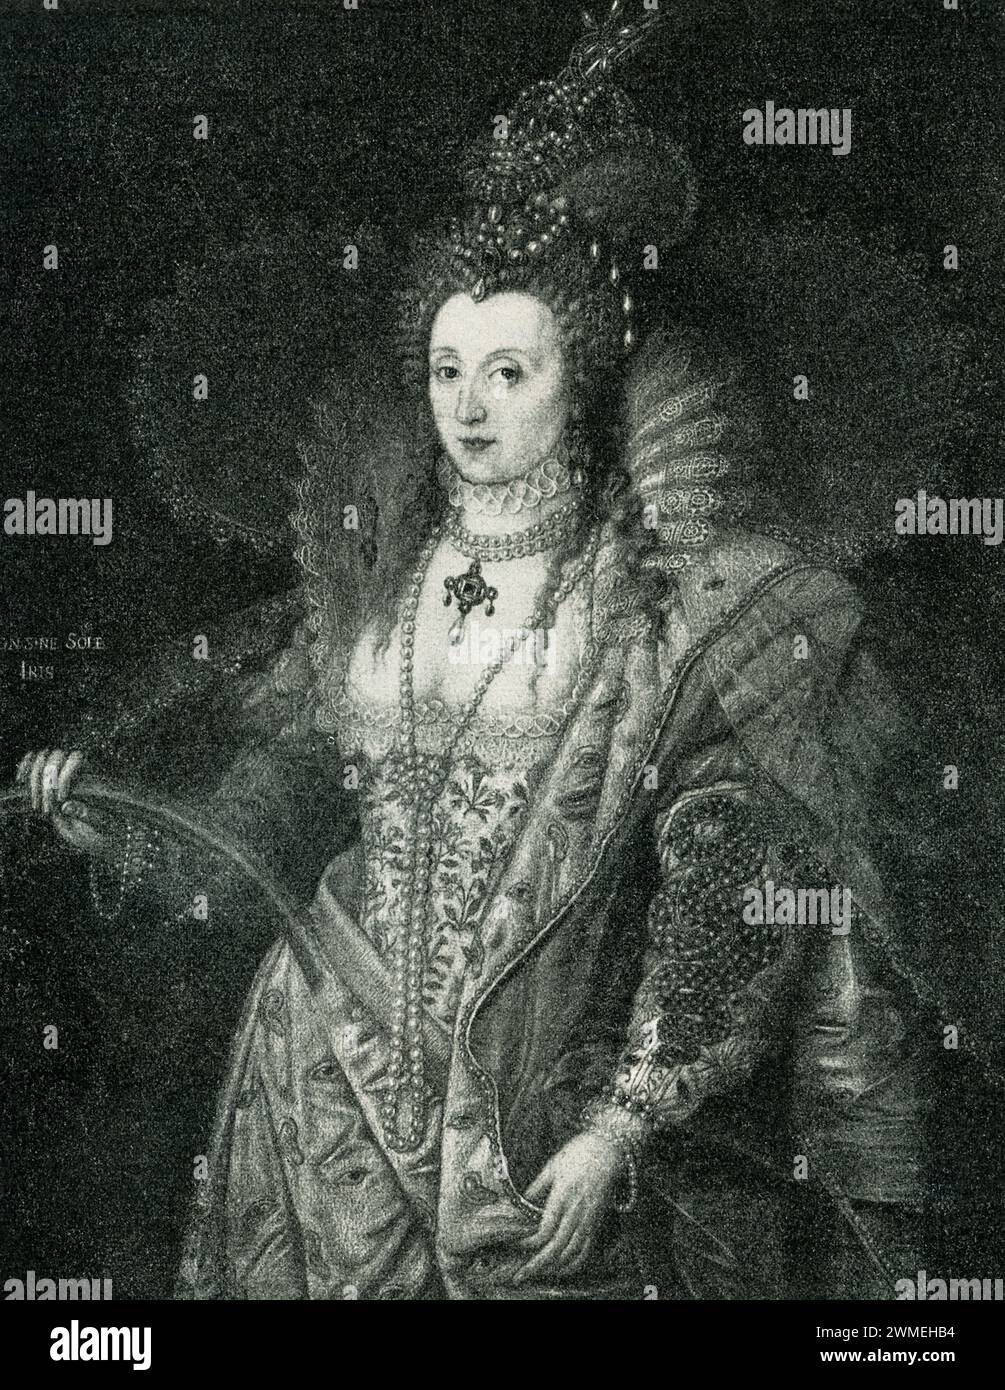 Here Elizabeth I of england is shown as symbolizing wisdom.Elizabeth I was Queen of England and Ireland from 17 November 1558 until her death in 1603. She was the last monarch of the House of Tudor. Elizabeth was the only surviving child of Henry VIII and Anne Boleyn, his second wife, who was executed when Elizabeth was two years old. This allegorical painting was done by the Italian artist Frederic Zucchero who died 1609. Stock Photo